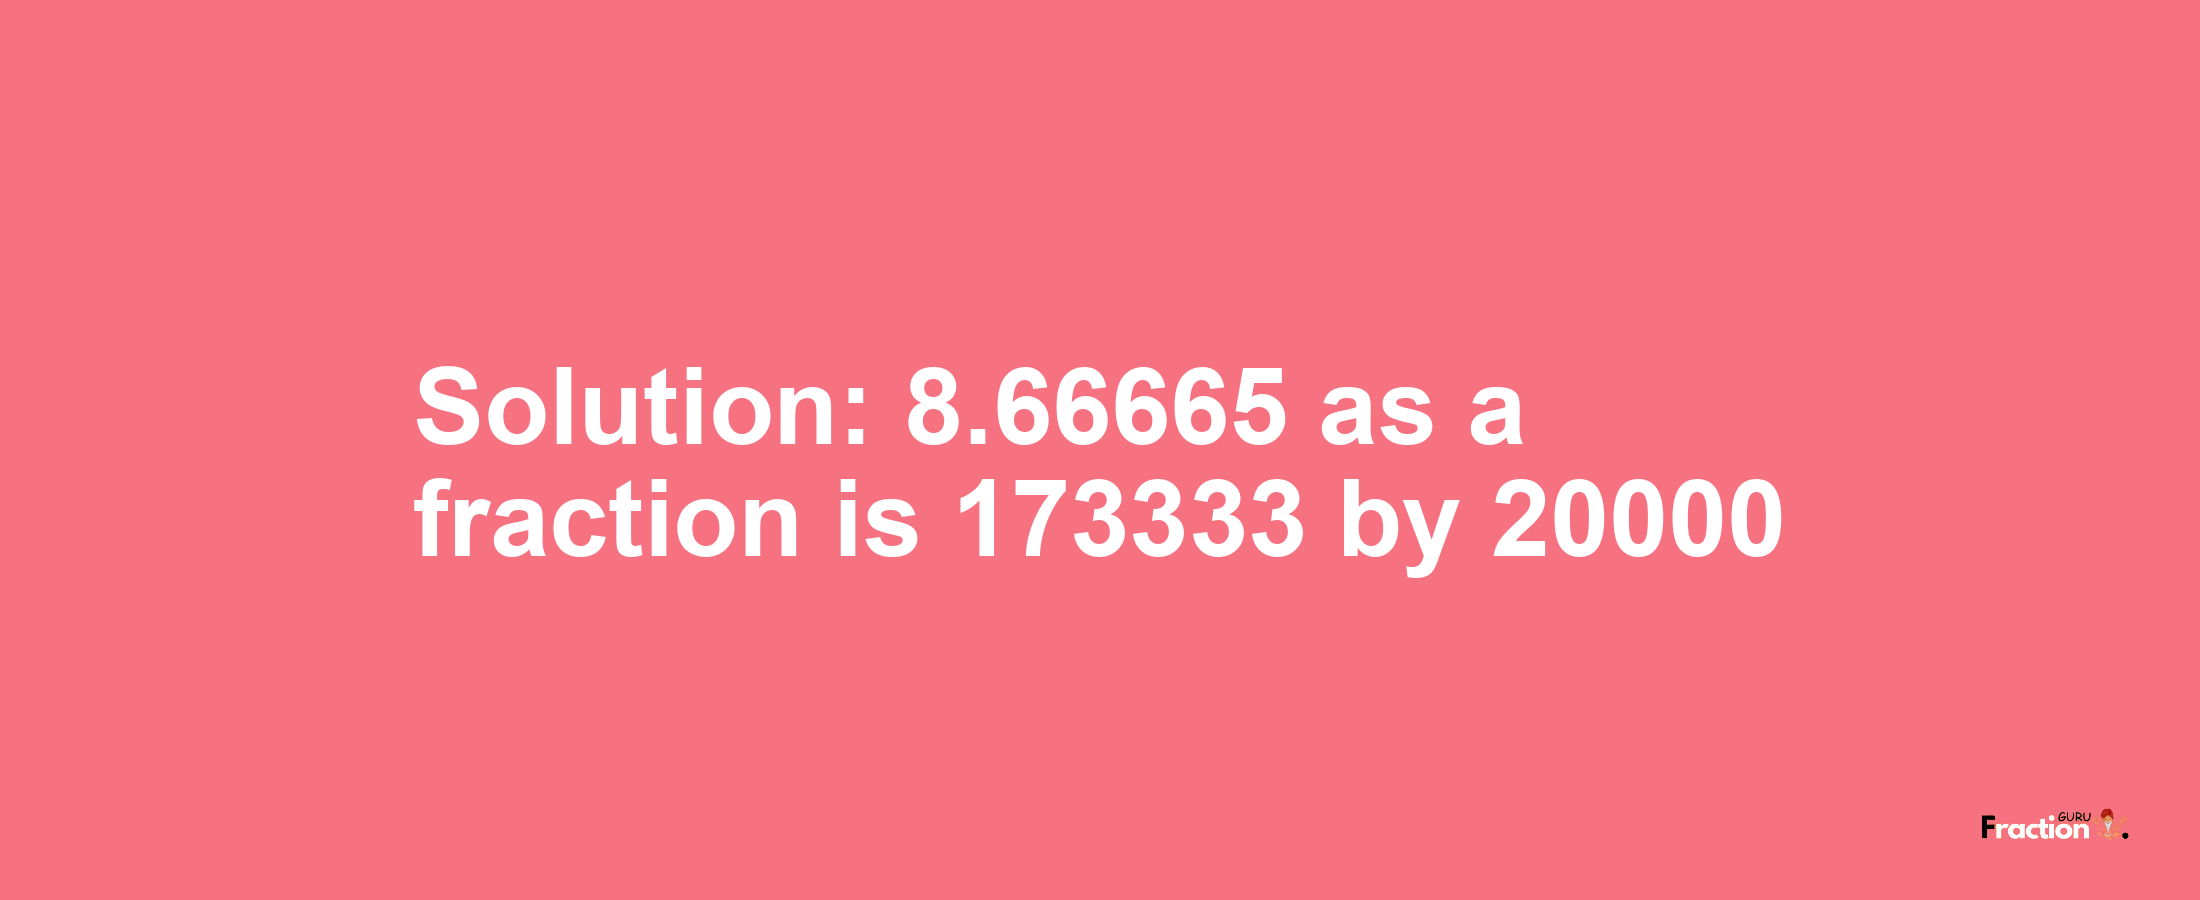 Solution:8.66665 as a fraction is 173333/20000